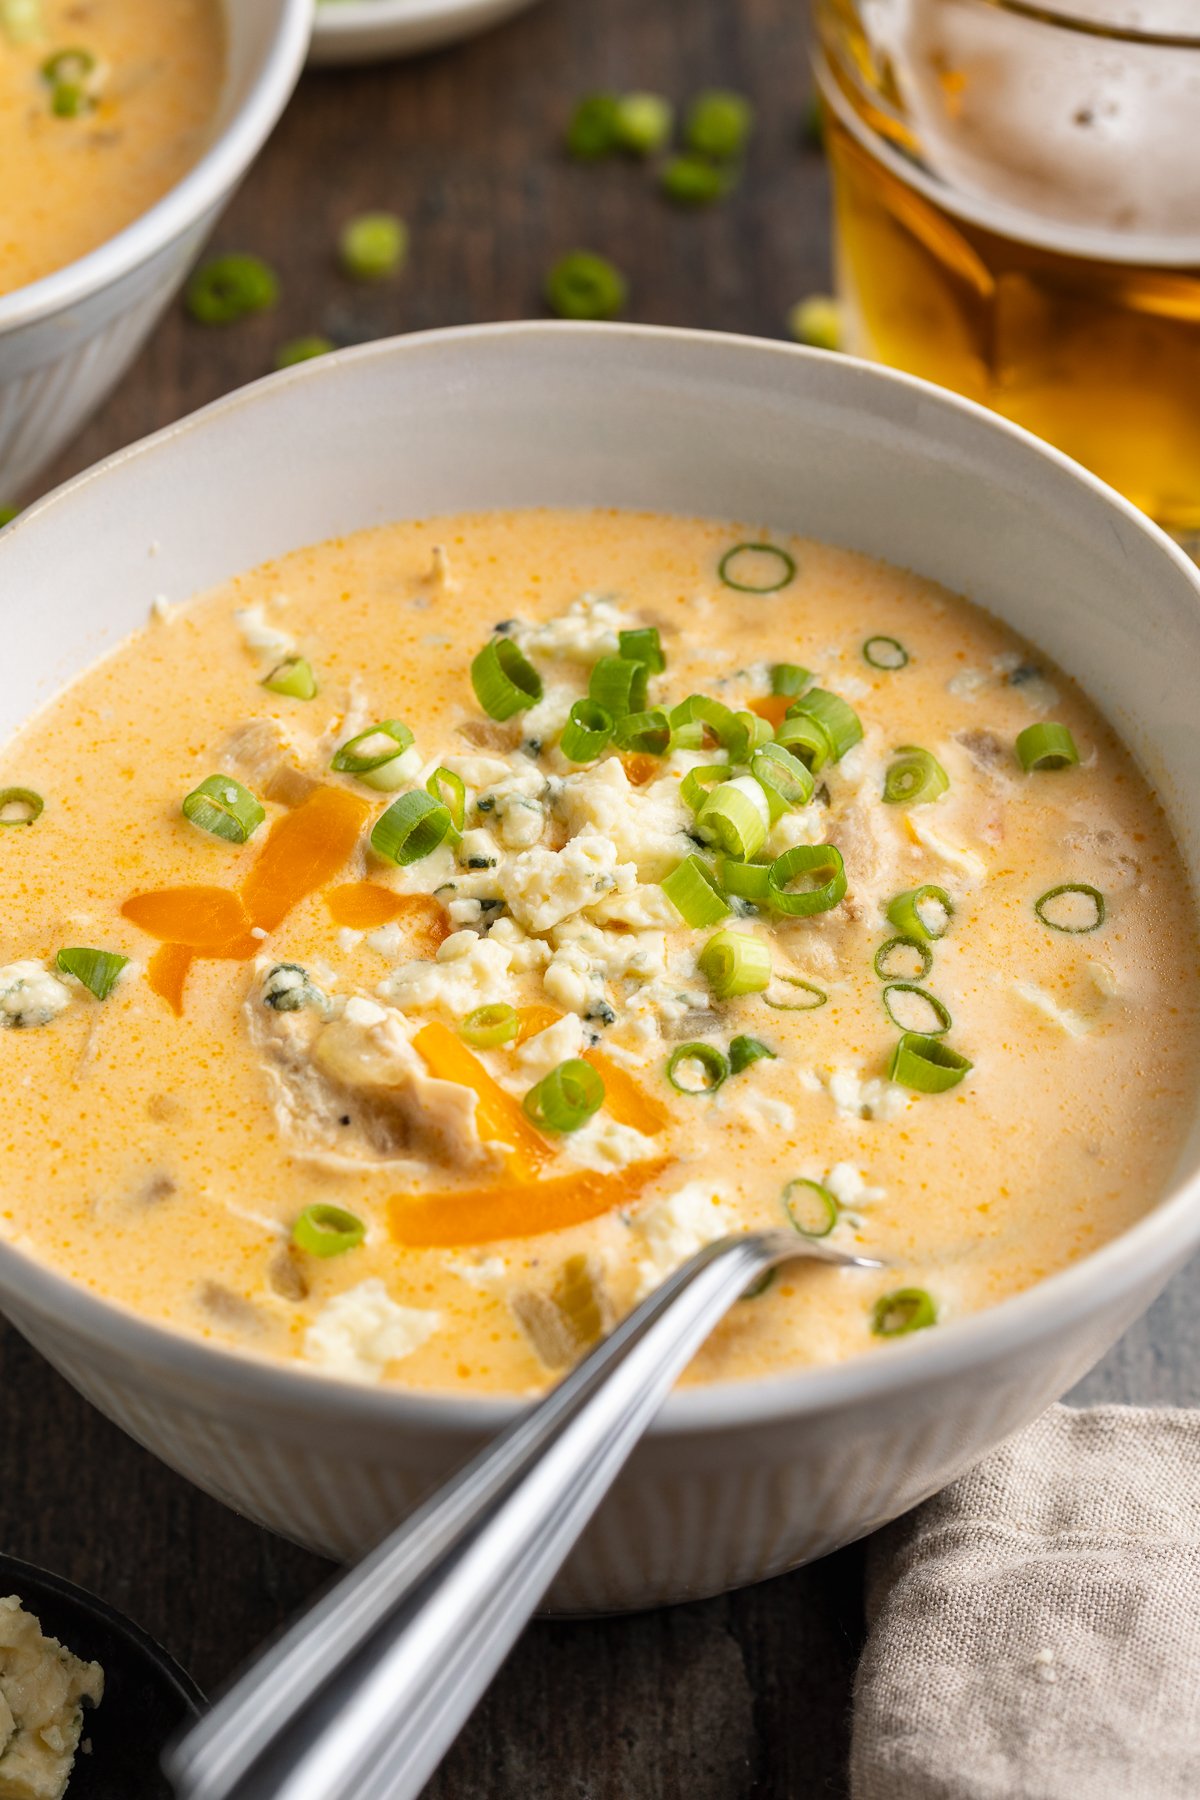 Angled view of a misshapen white bowl containing pale orange buffalo chicken soup topped with green onions and cheese.